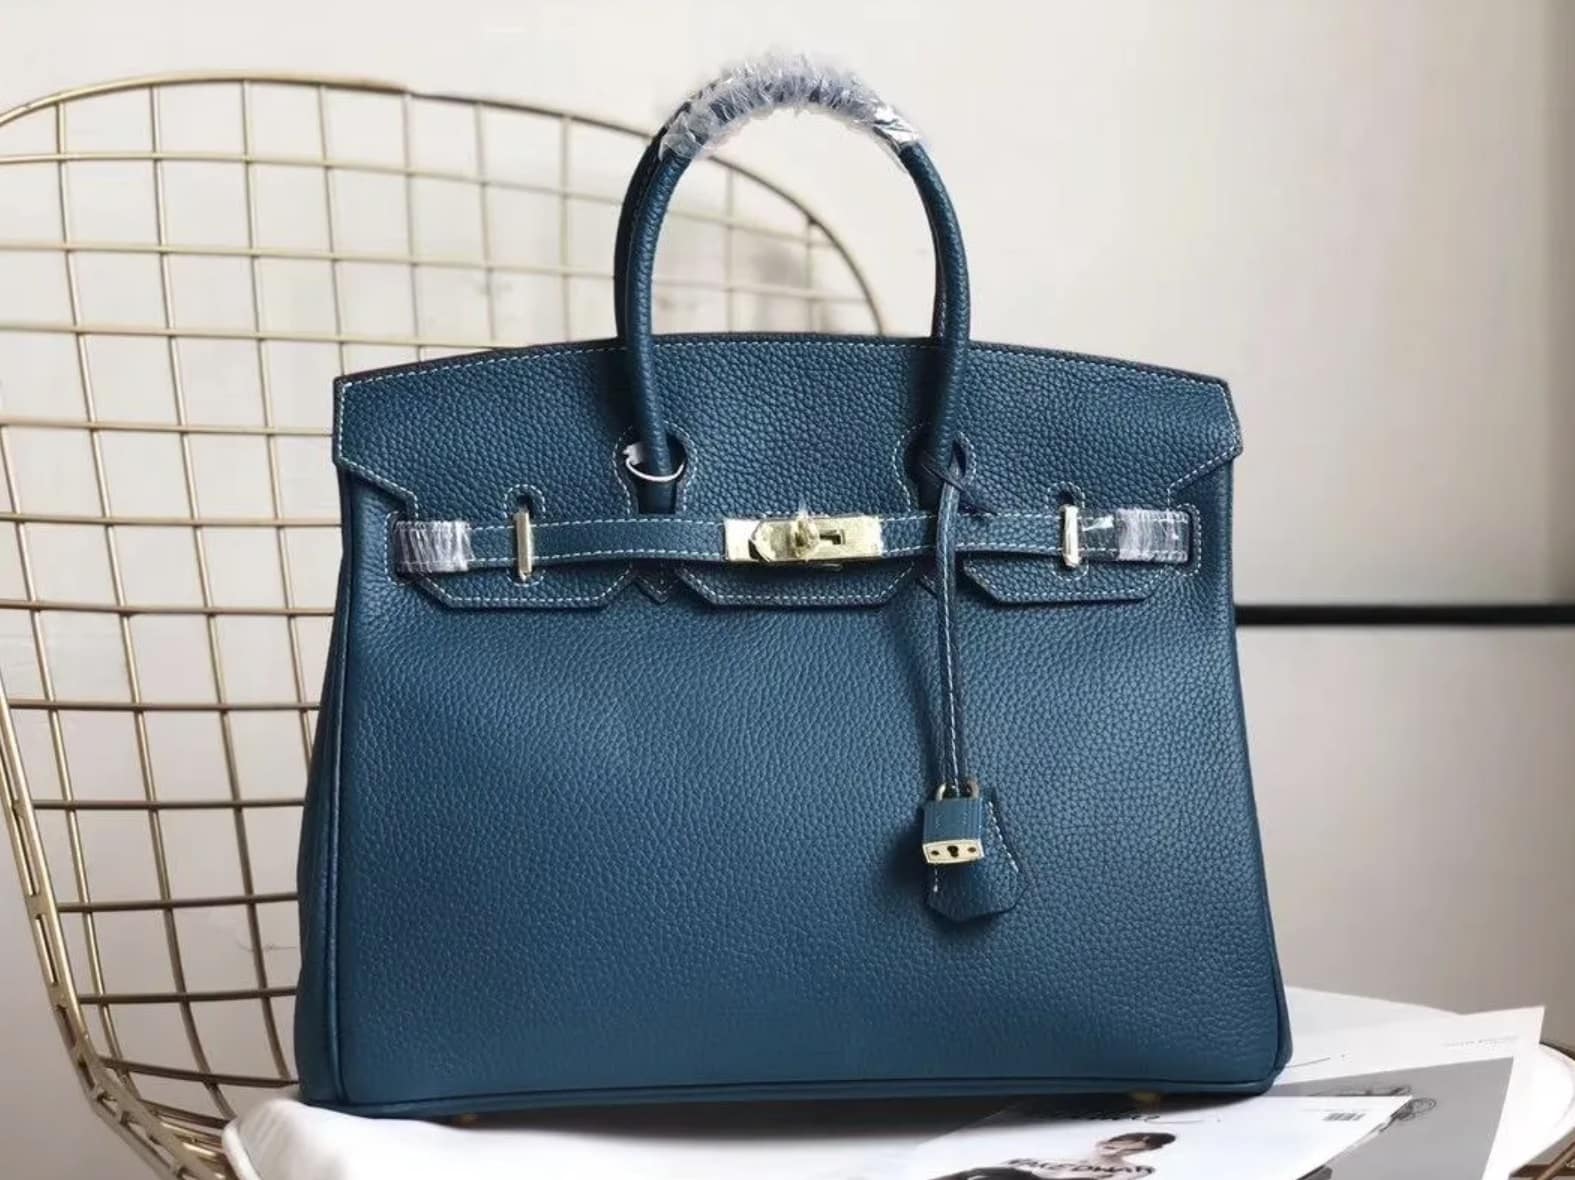 9 Affordable Birkin Bag Dupes and Look-Alikes You Can Buy Online